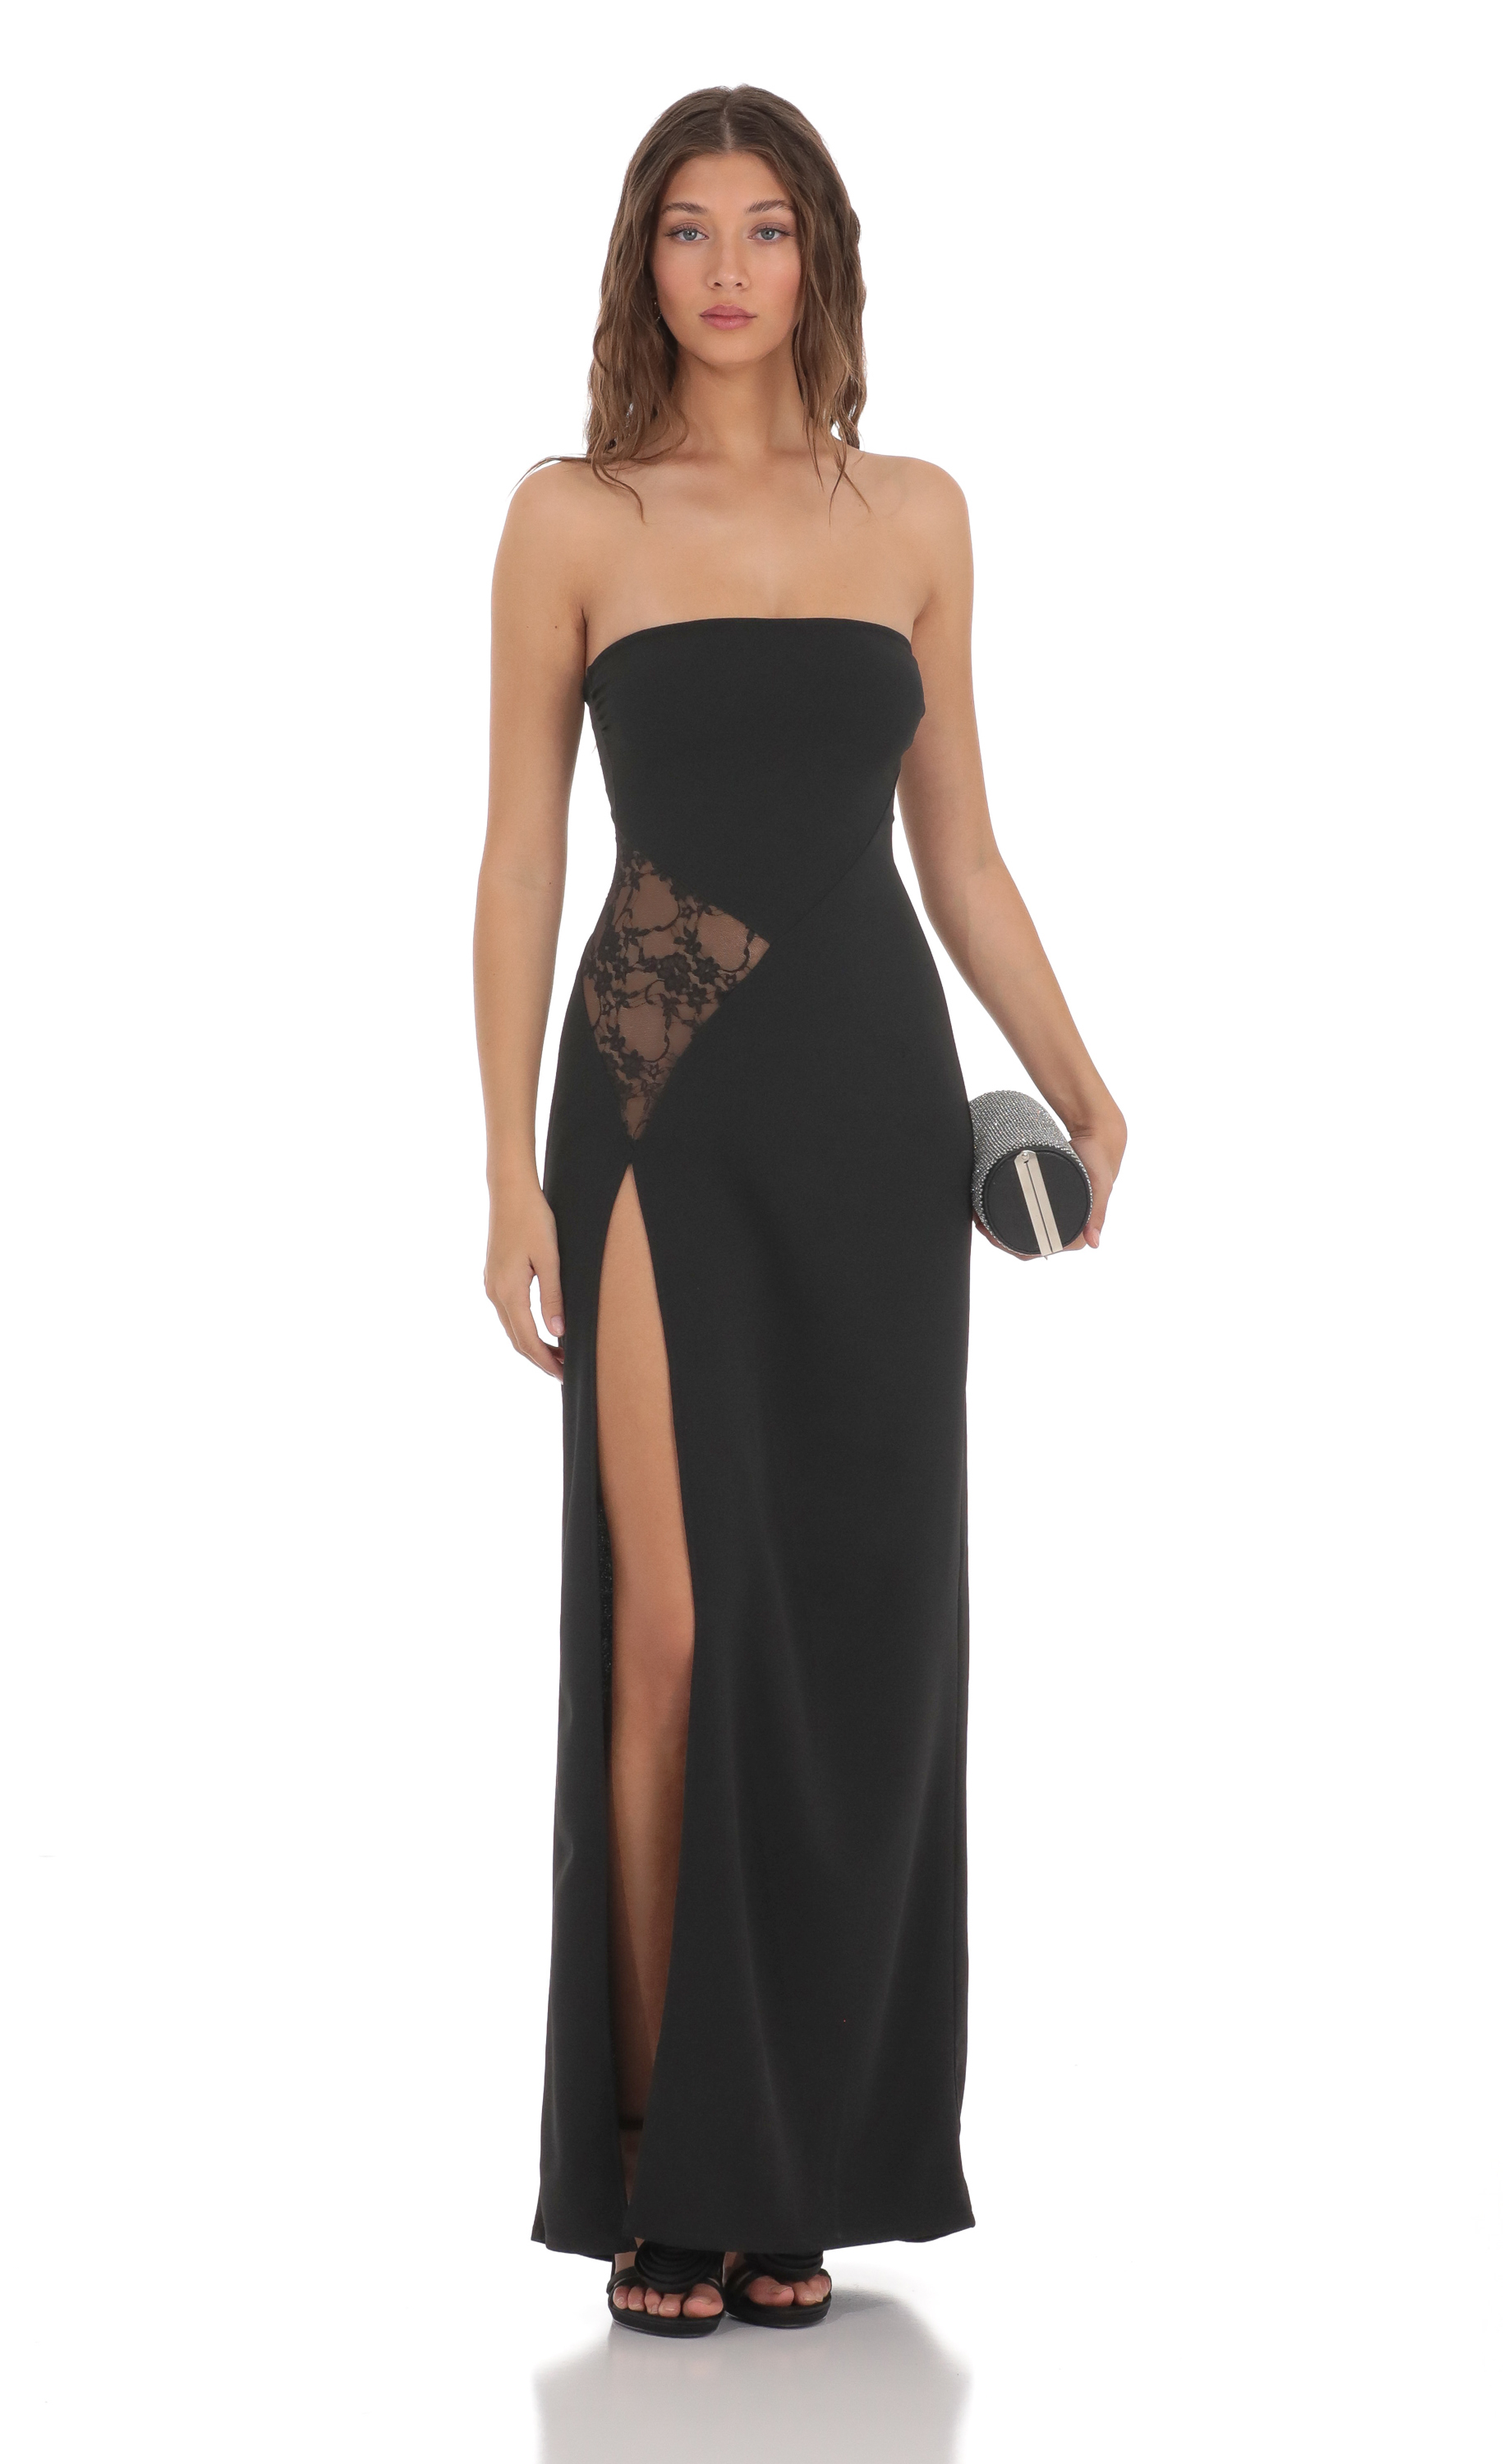 Strapless Lace Cut Out Dress in Black